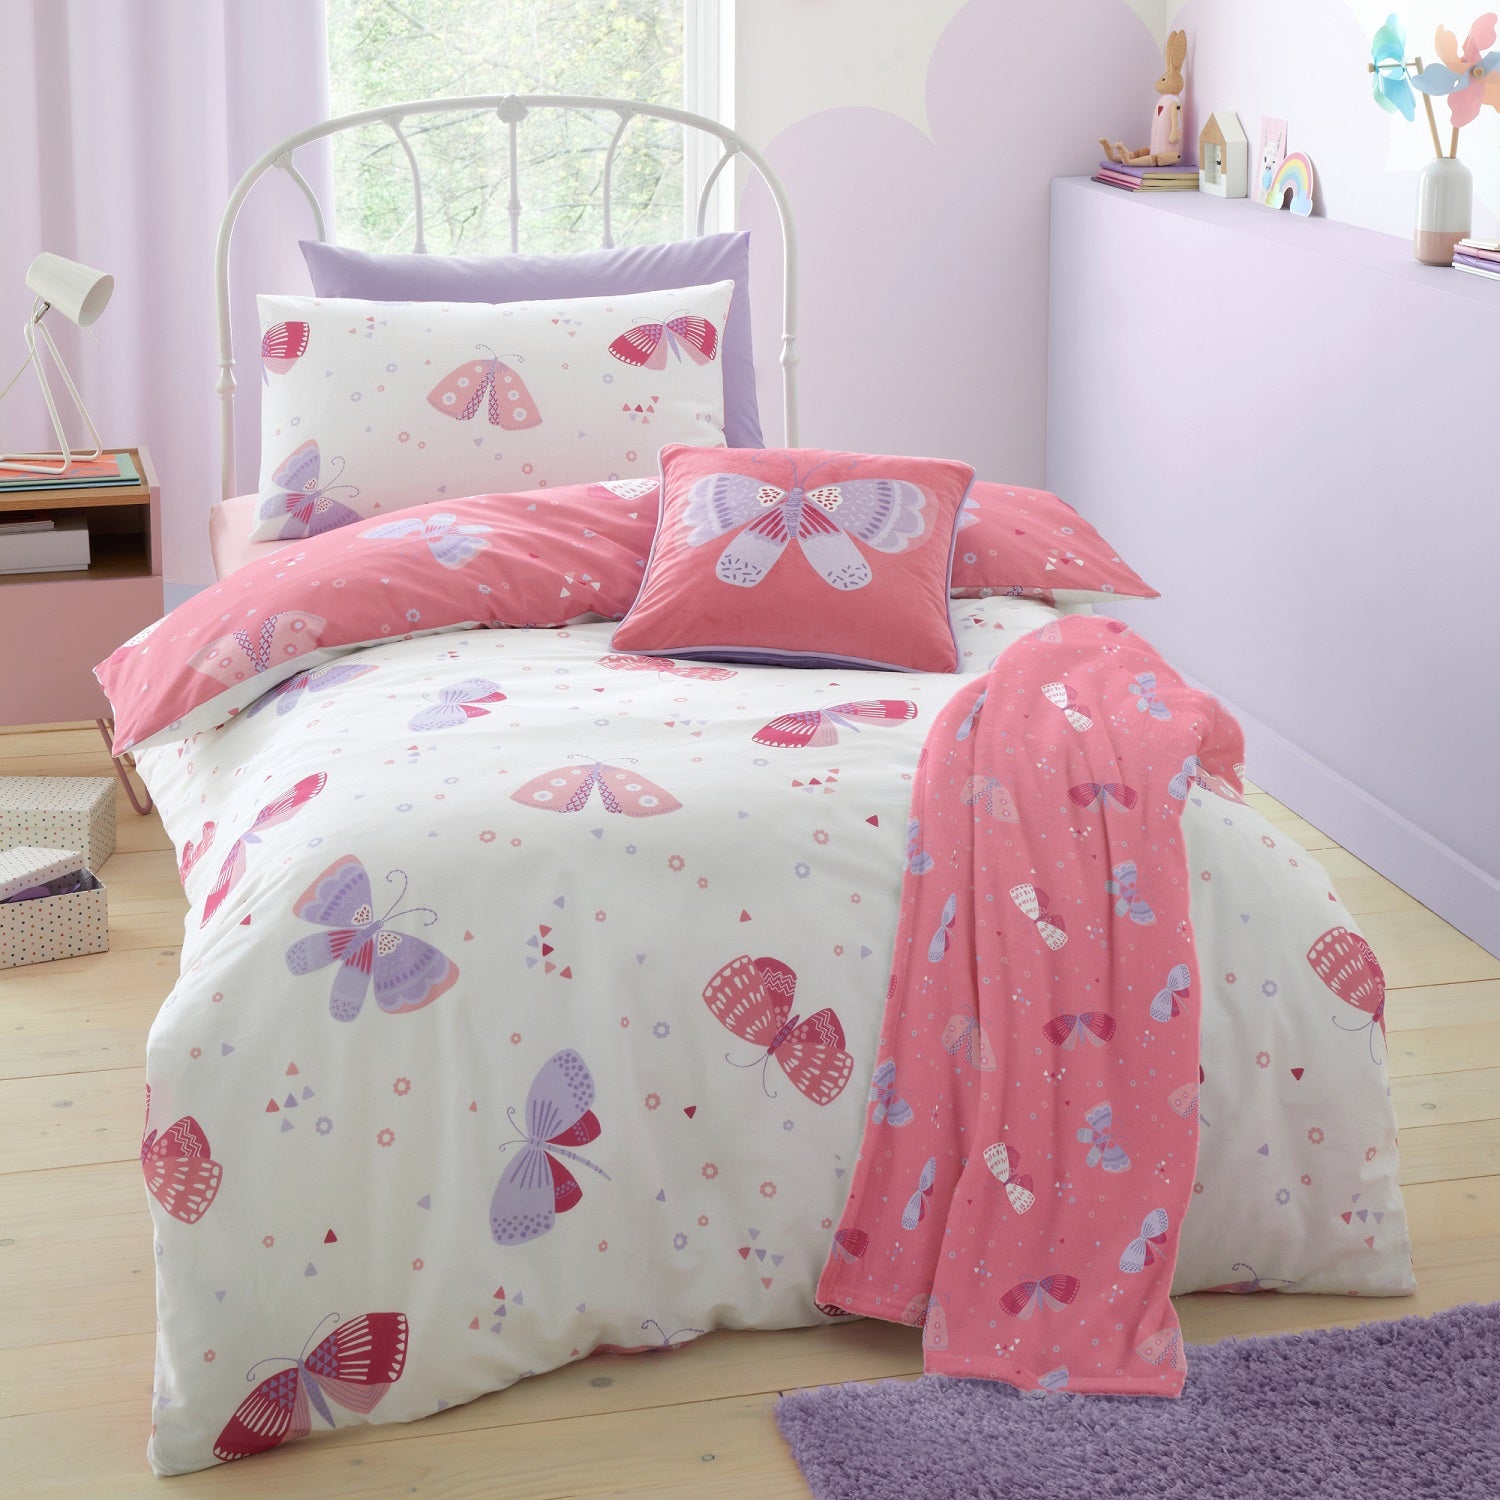 Flutterby Butterfly Duvet Cover Set, Single, Pink & Lilac